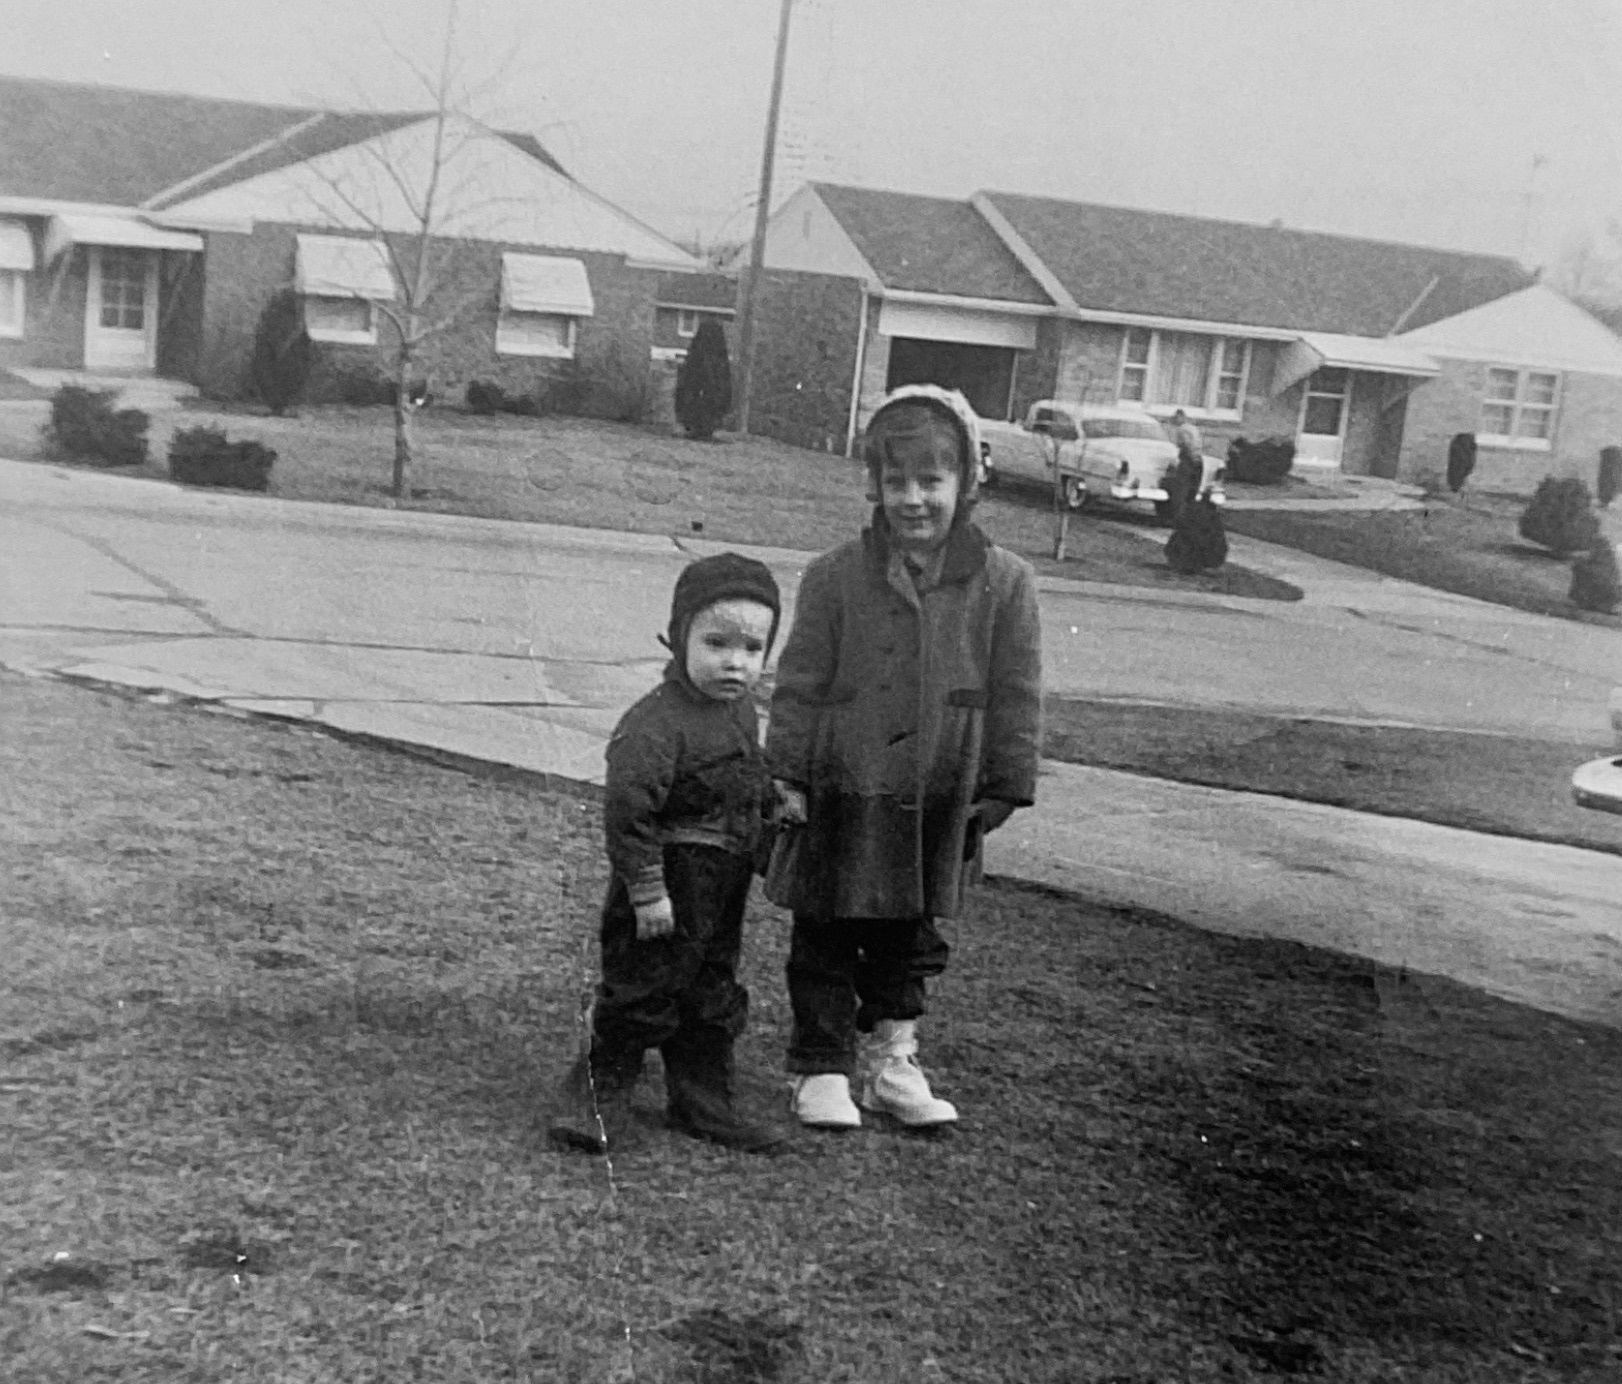 Patti Lingenfelter and her nephew, Lil Danny. In the background are two classic Hathaway Hills brick homes with awnings and one-car garages on Filibert Drive. LINGENFELTER FAMILY COLLECTION